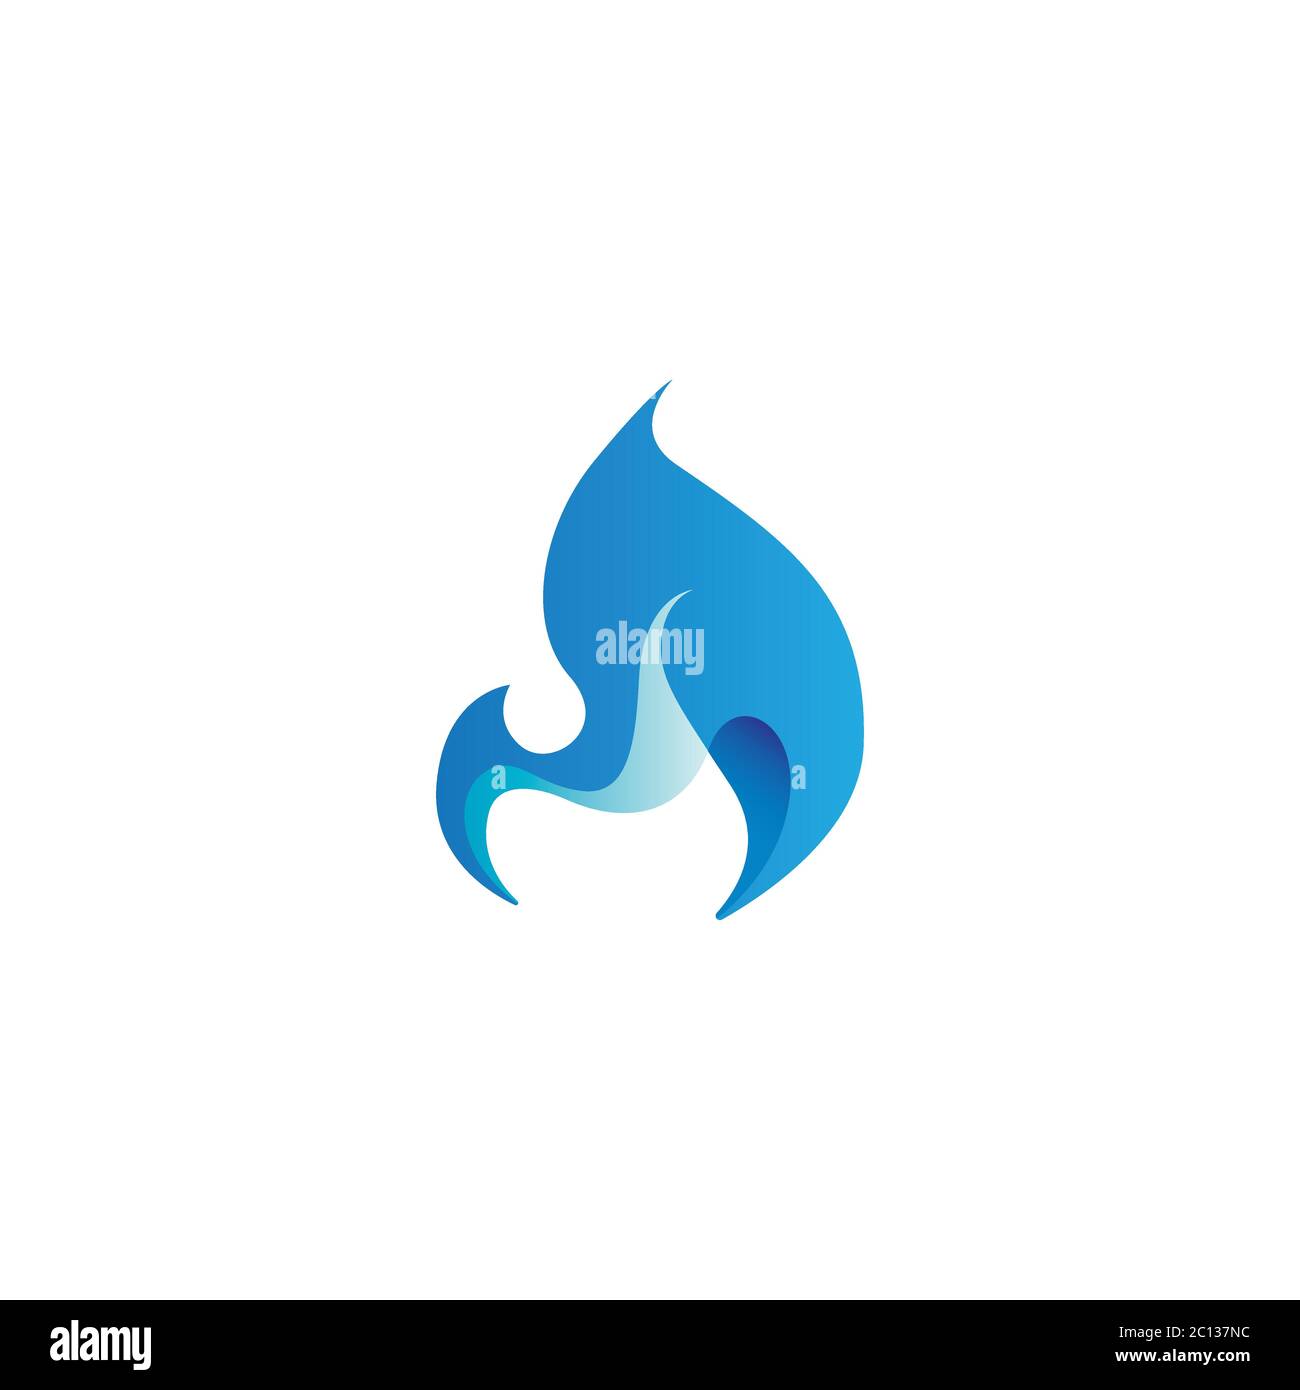 Abstract flame design element, stylized fire icon, three-dimensional modern vector Stock Vector